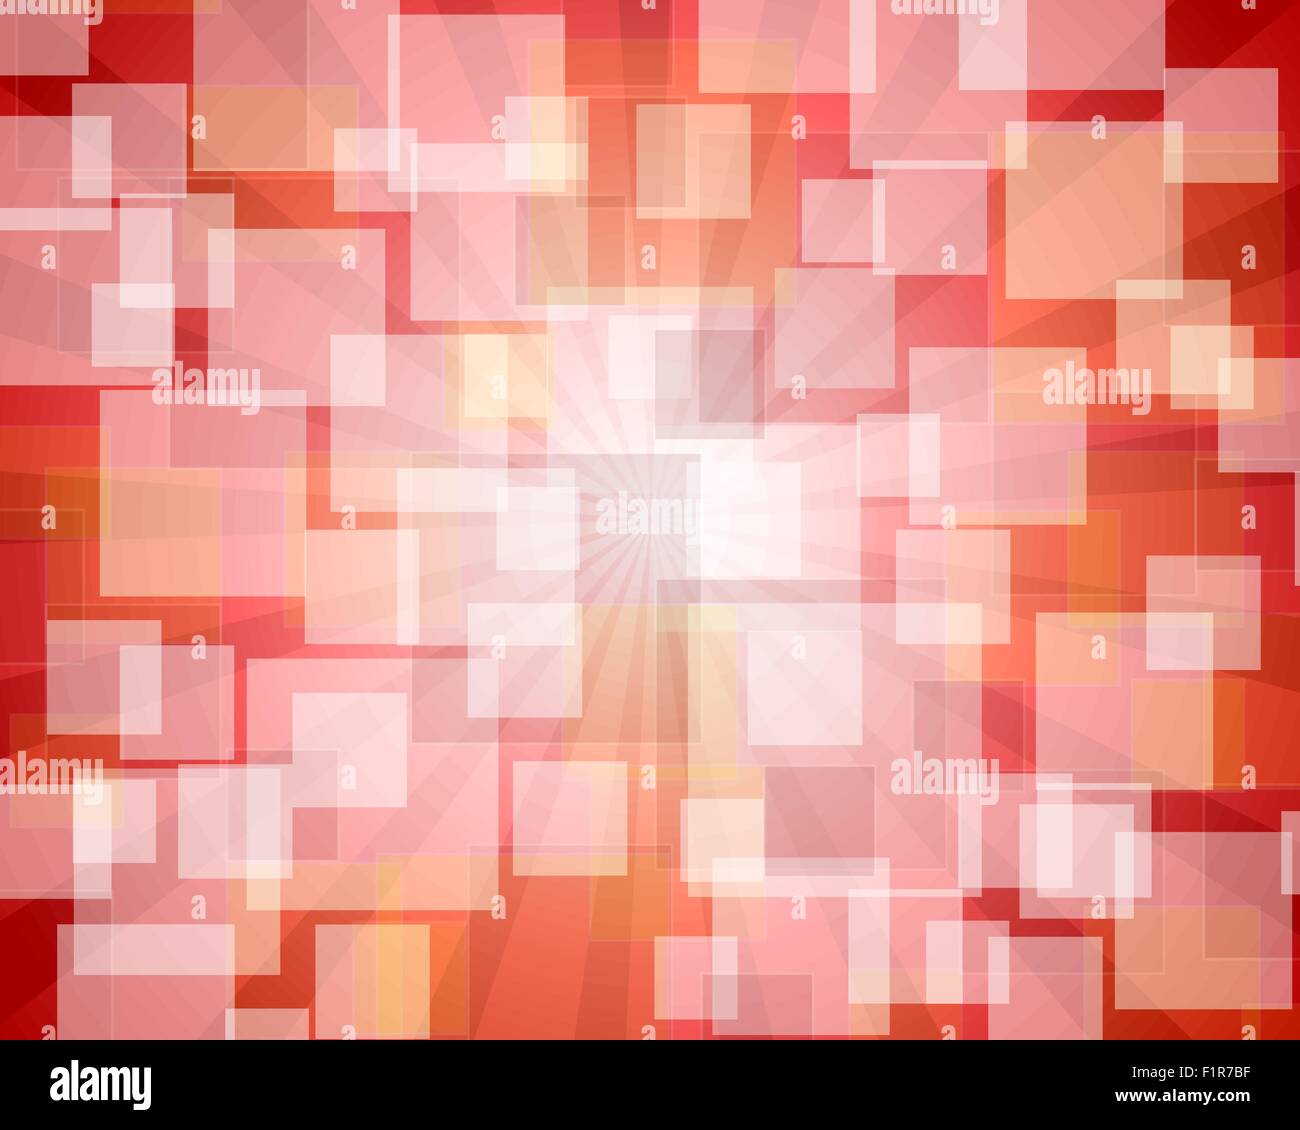 Abstract background with bokeh effect. Vector illustration. Stock Vector